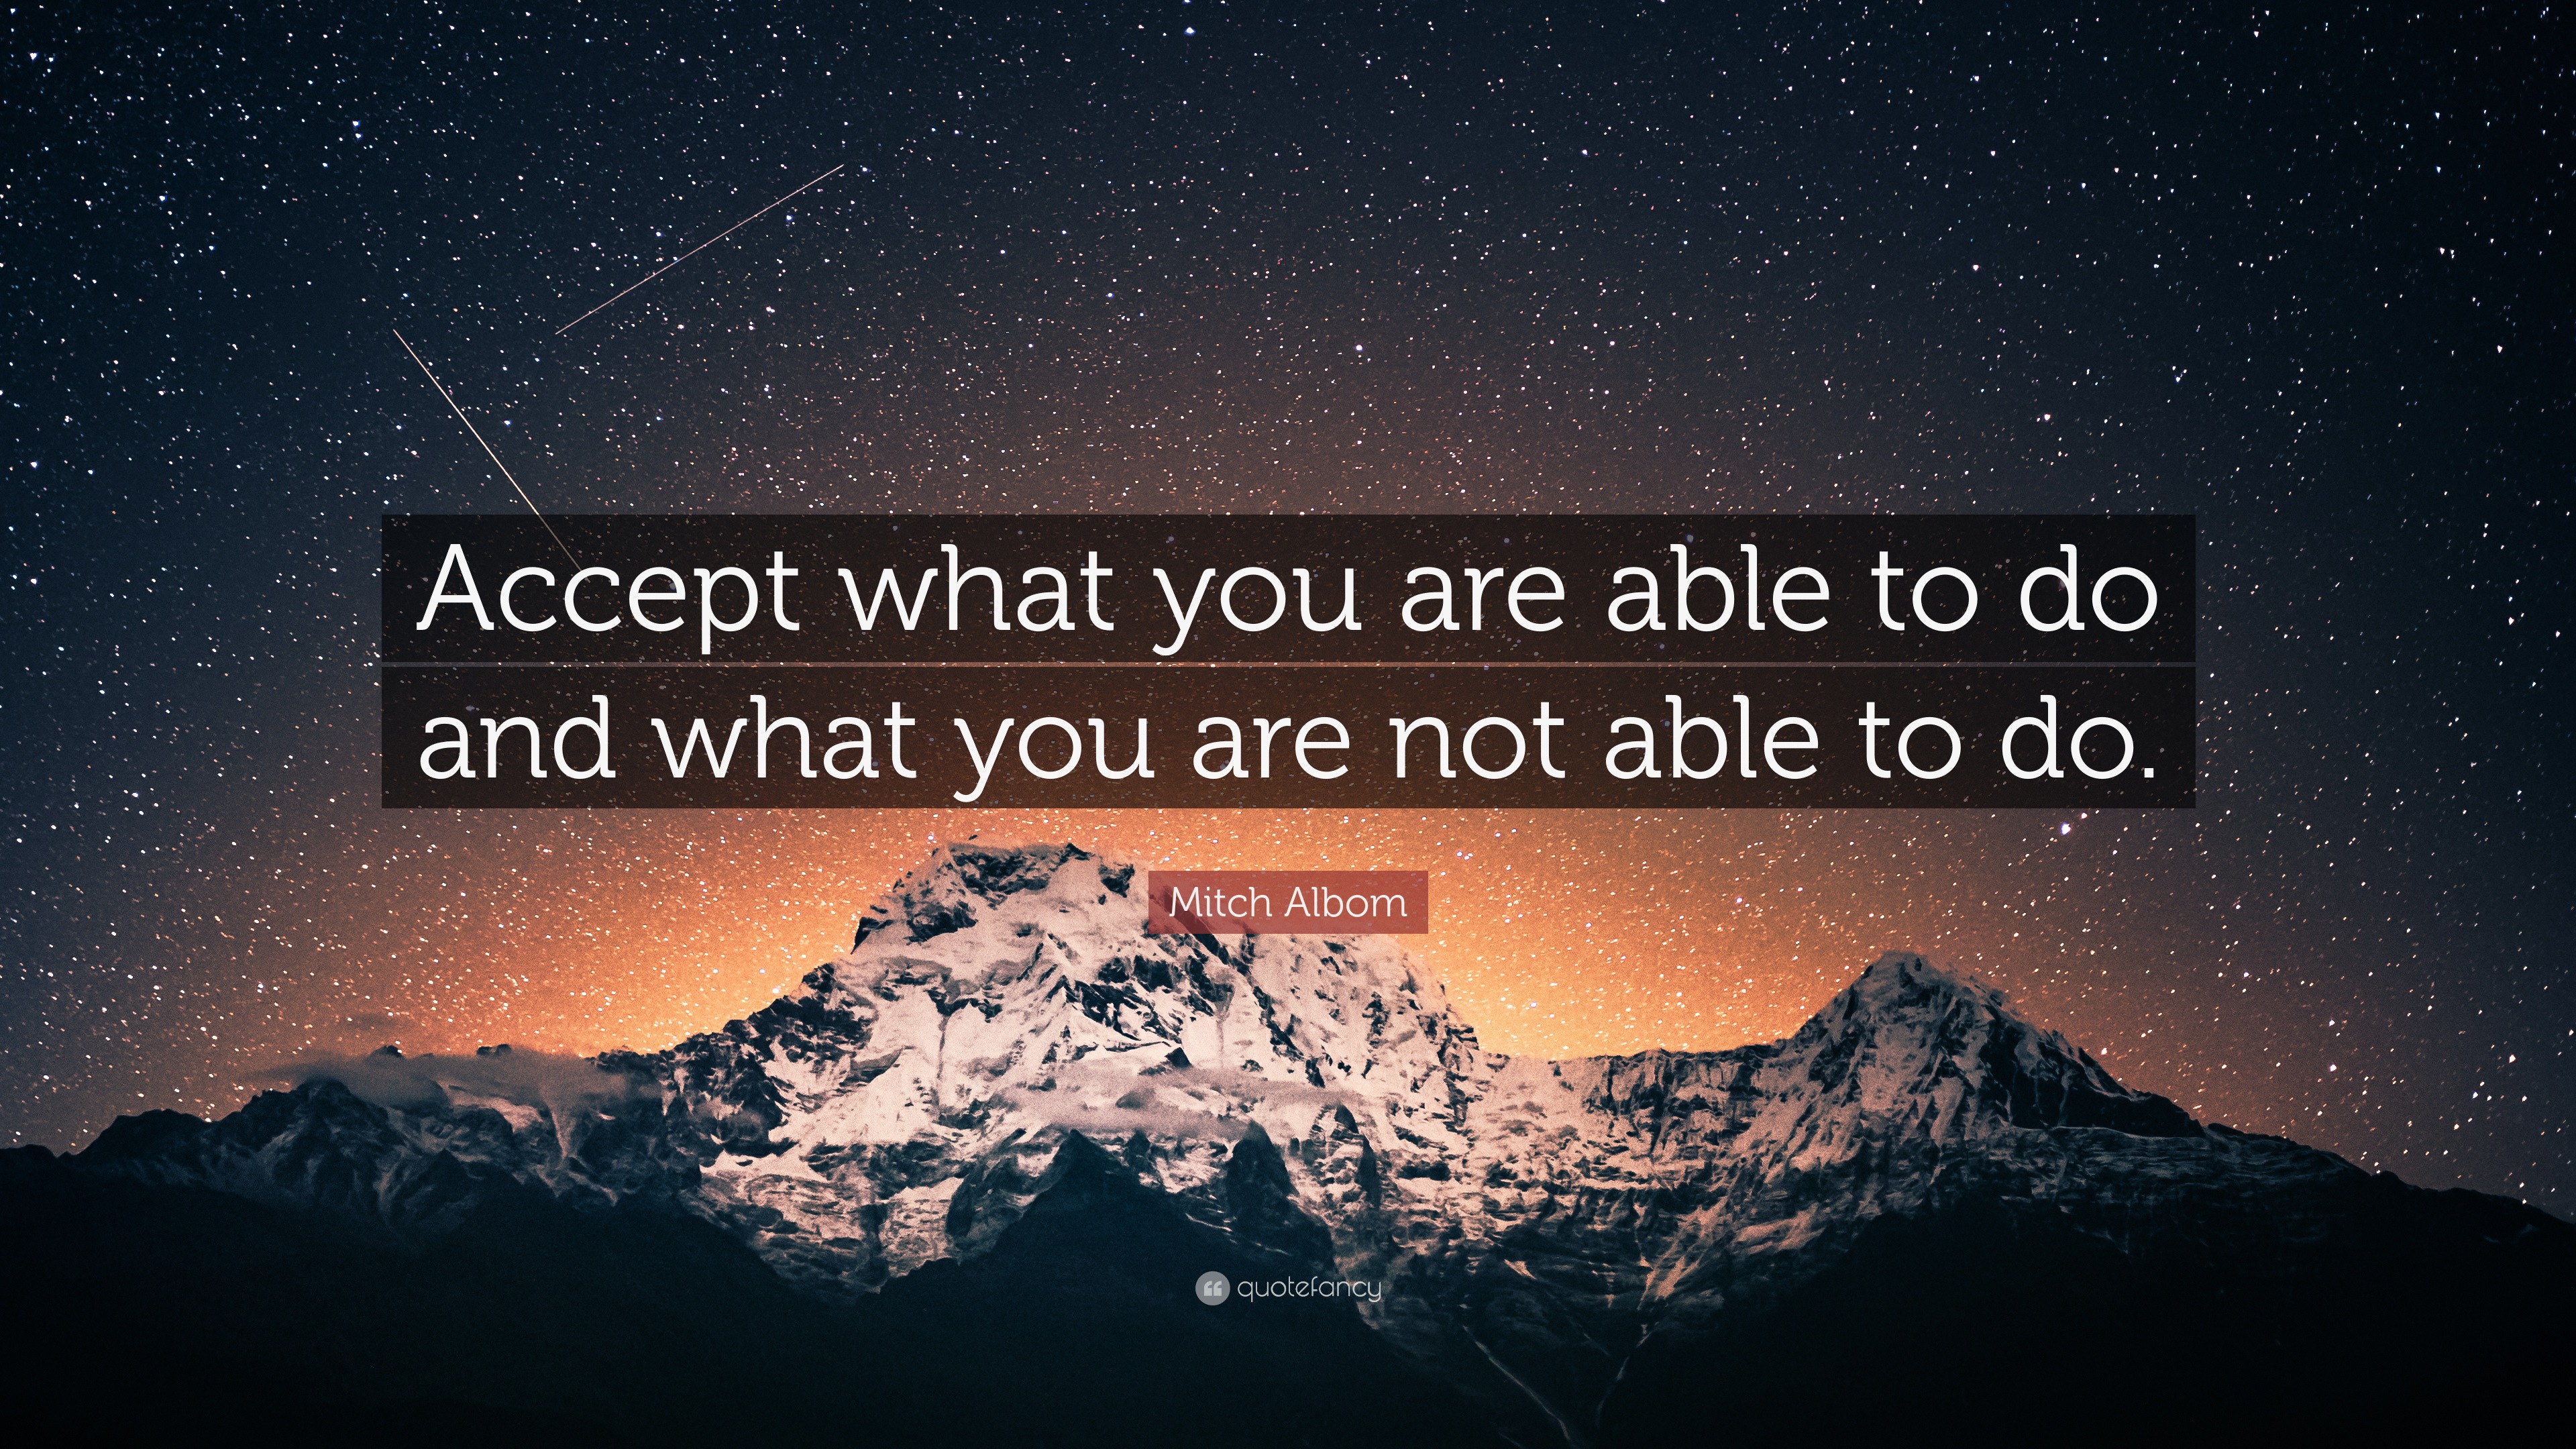 Mitch Albom Quote: “Accept what you are able to do and what you are not ...